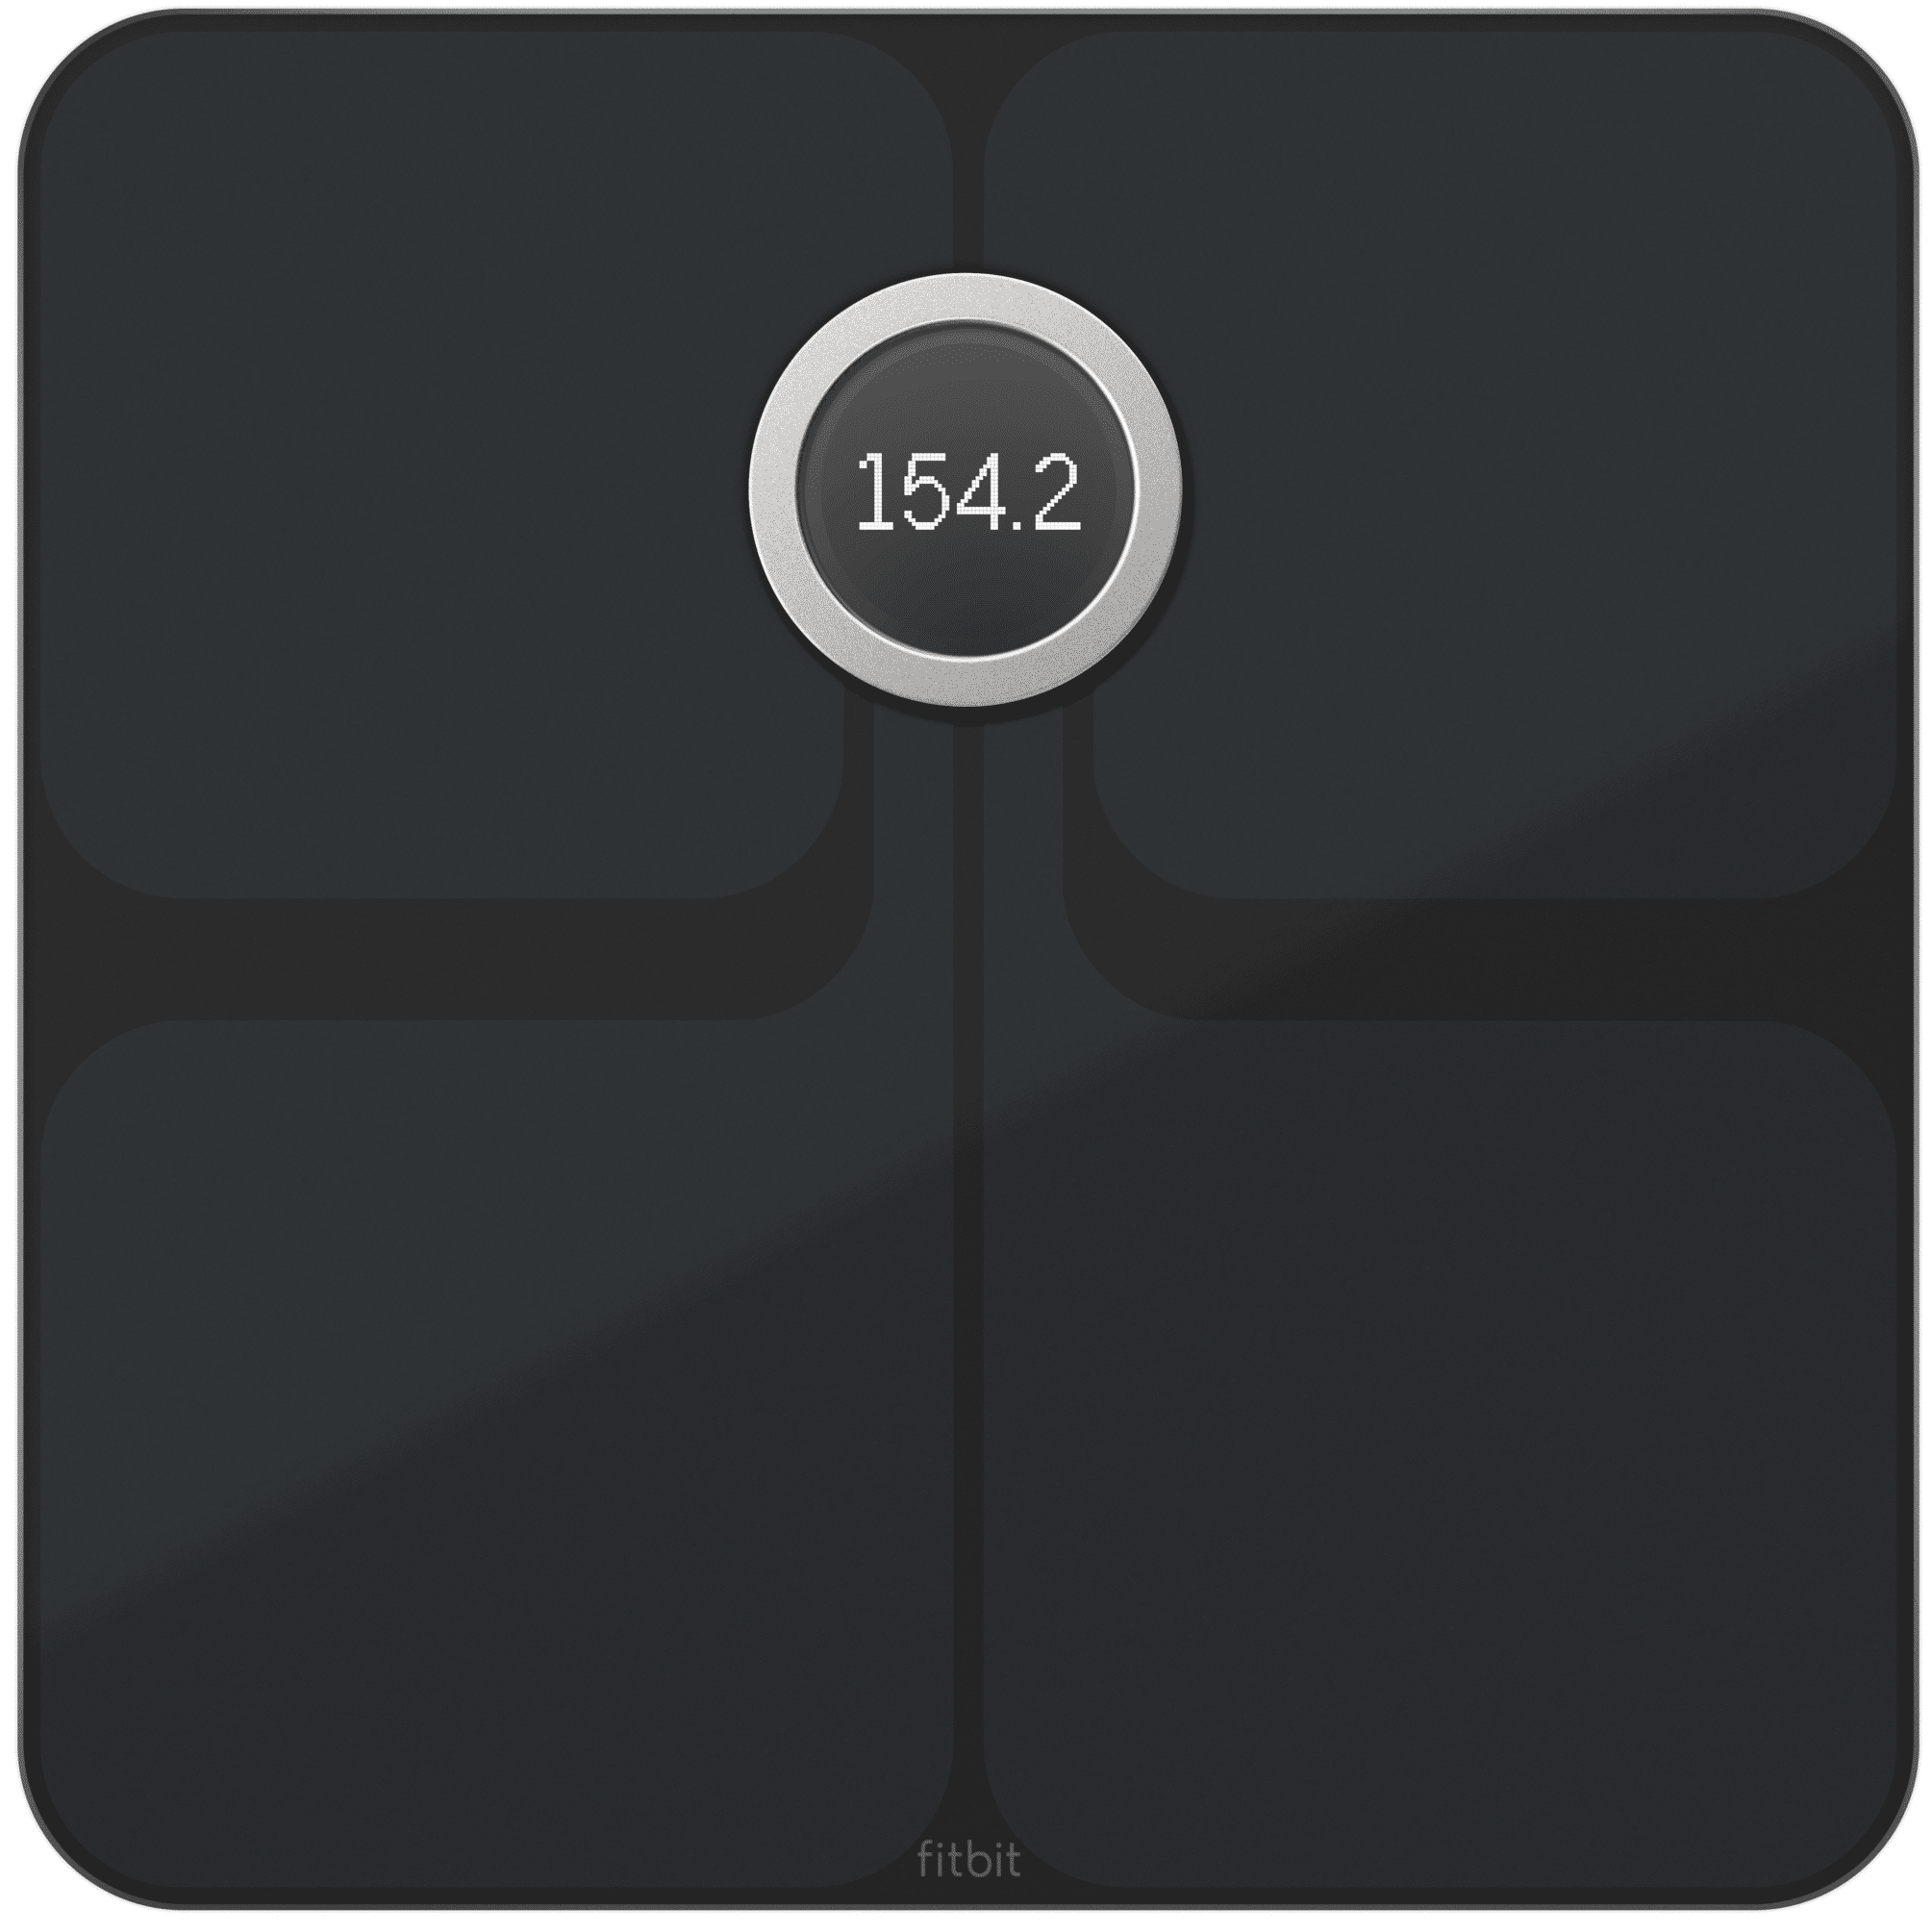 Fitbit Aria Air-smart scale, more complete health perspective, bluetooth  sync, Fibit compatible, multiple users, white color - AliExpress